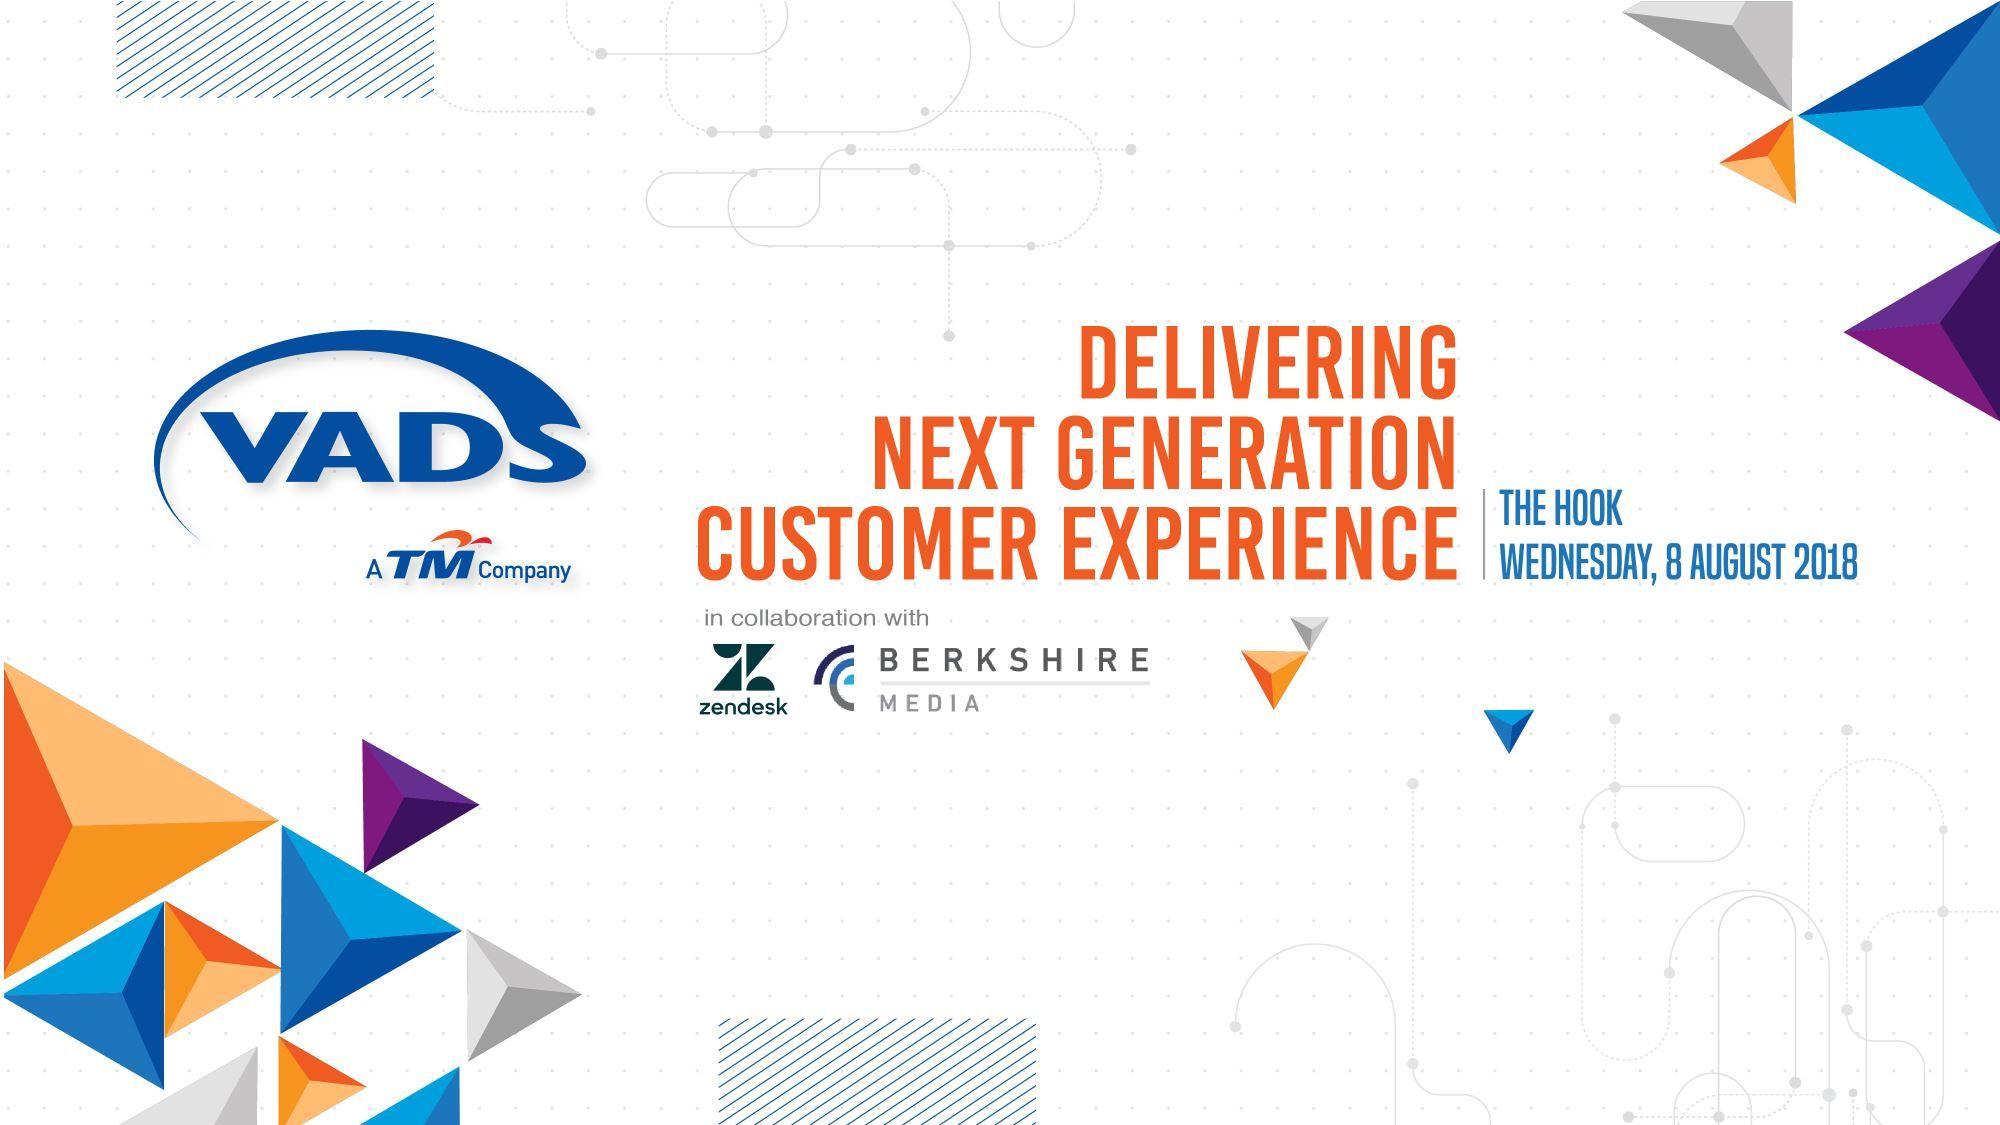 VADS Logo - VADS VADS Indonesia: Delivering Next Generation Customer Experience